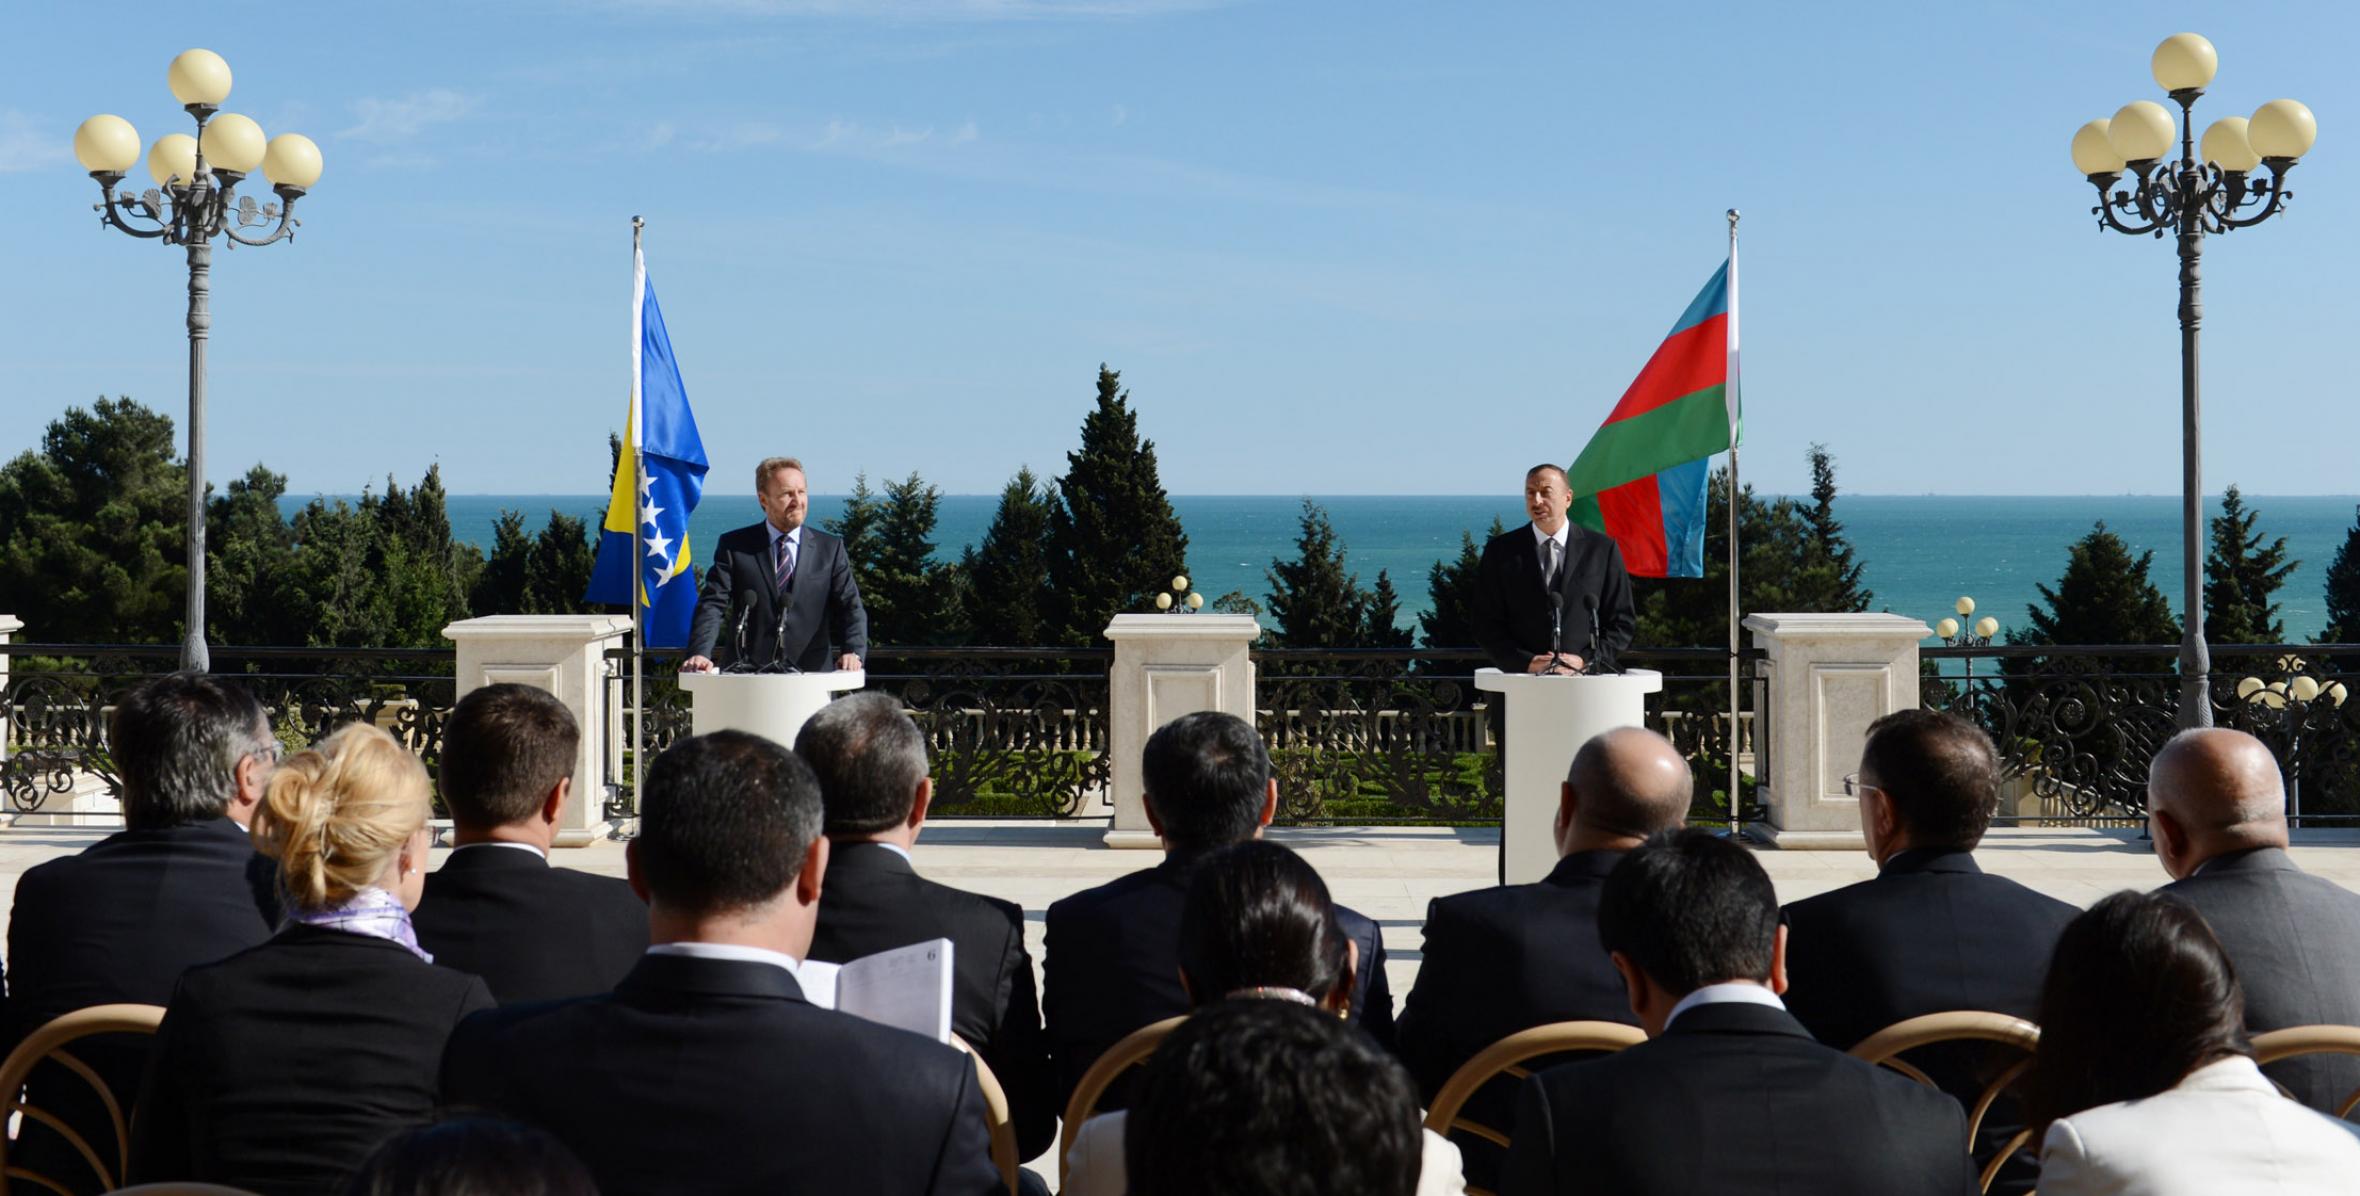 Ilham Aliyev and Chairman of the Presidency of Bosnia and Herzegovina Bakir Izetbegovic made statements for the press